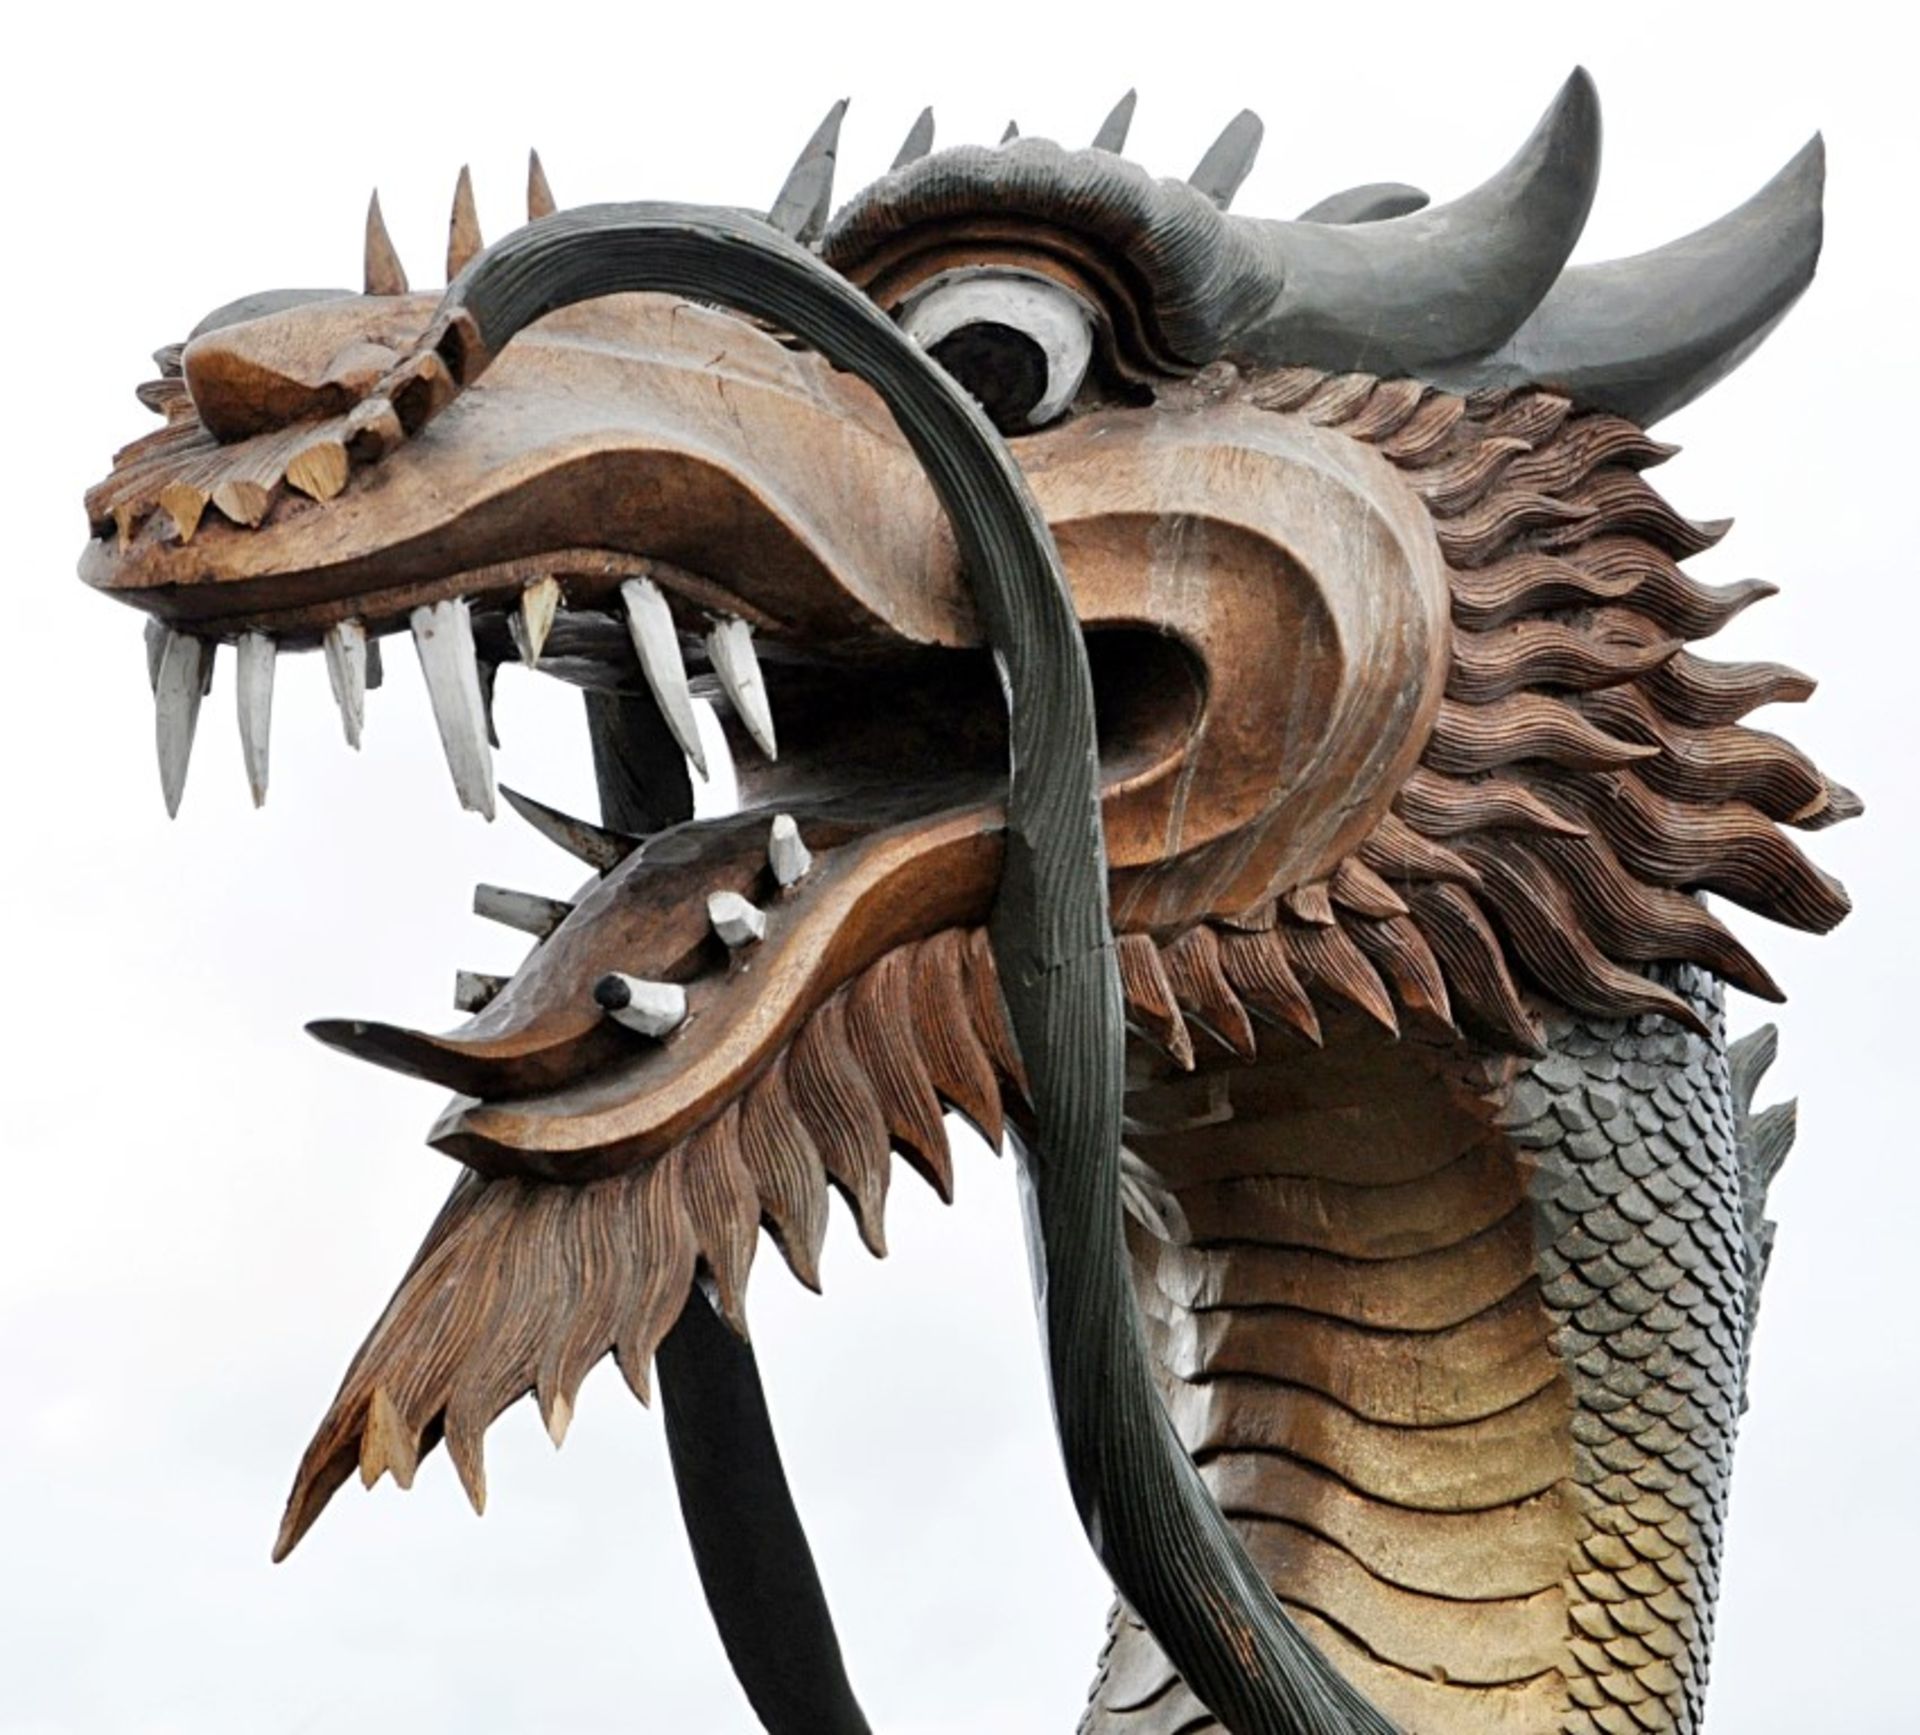 1 x 7ft Tall, Wooden, Freestanding DRAGON Statue – Good, Pre-owned Condition - Hand Carved & Painted